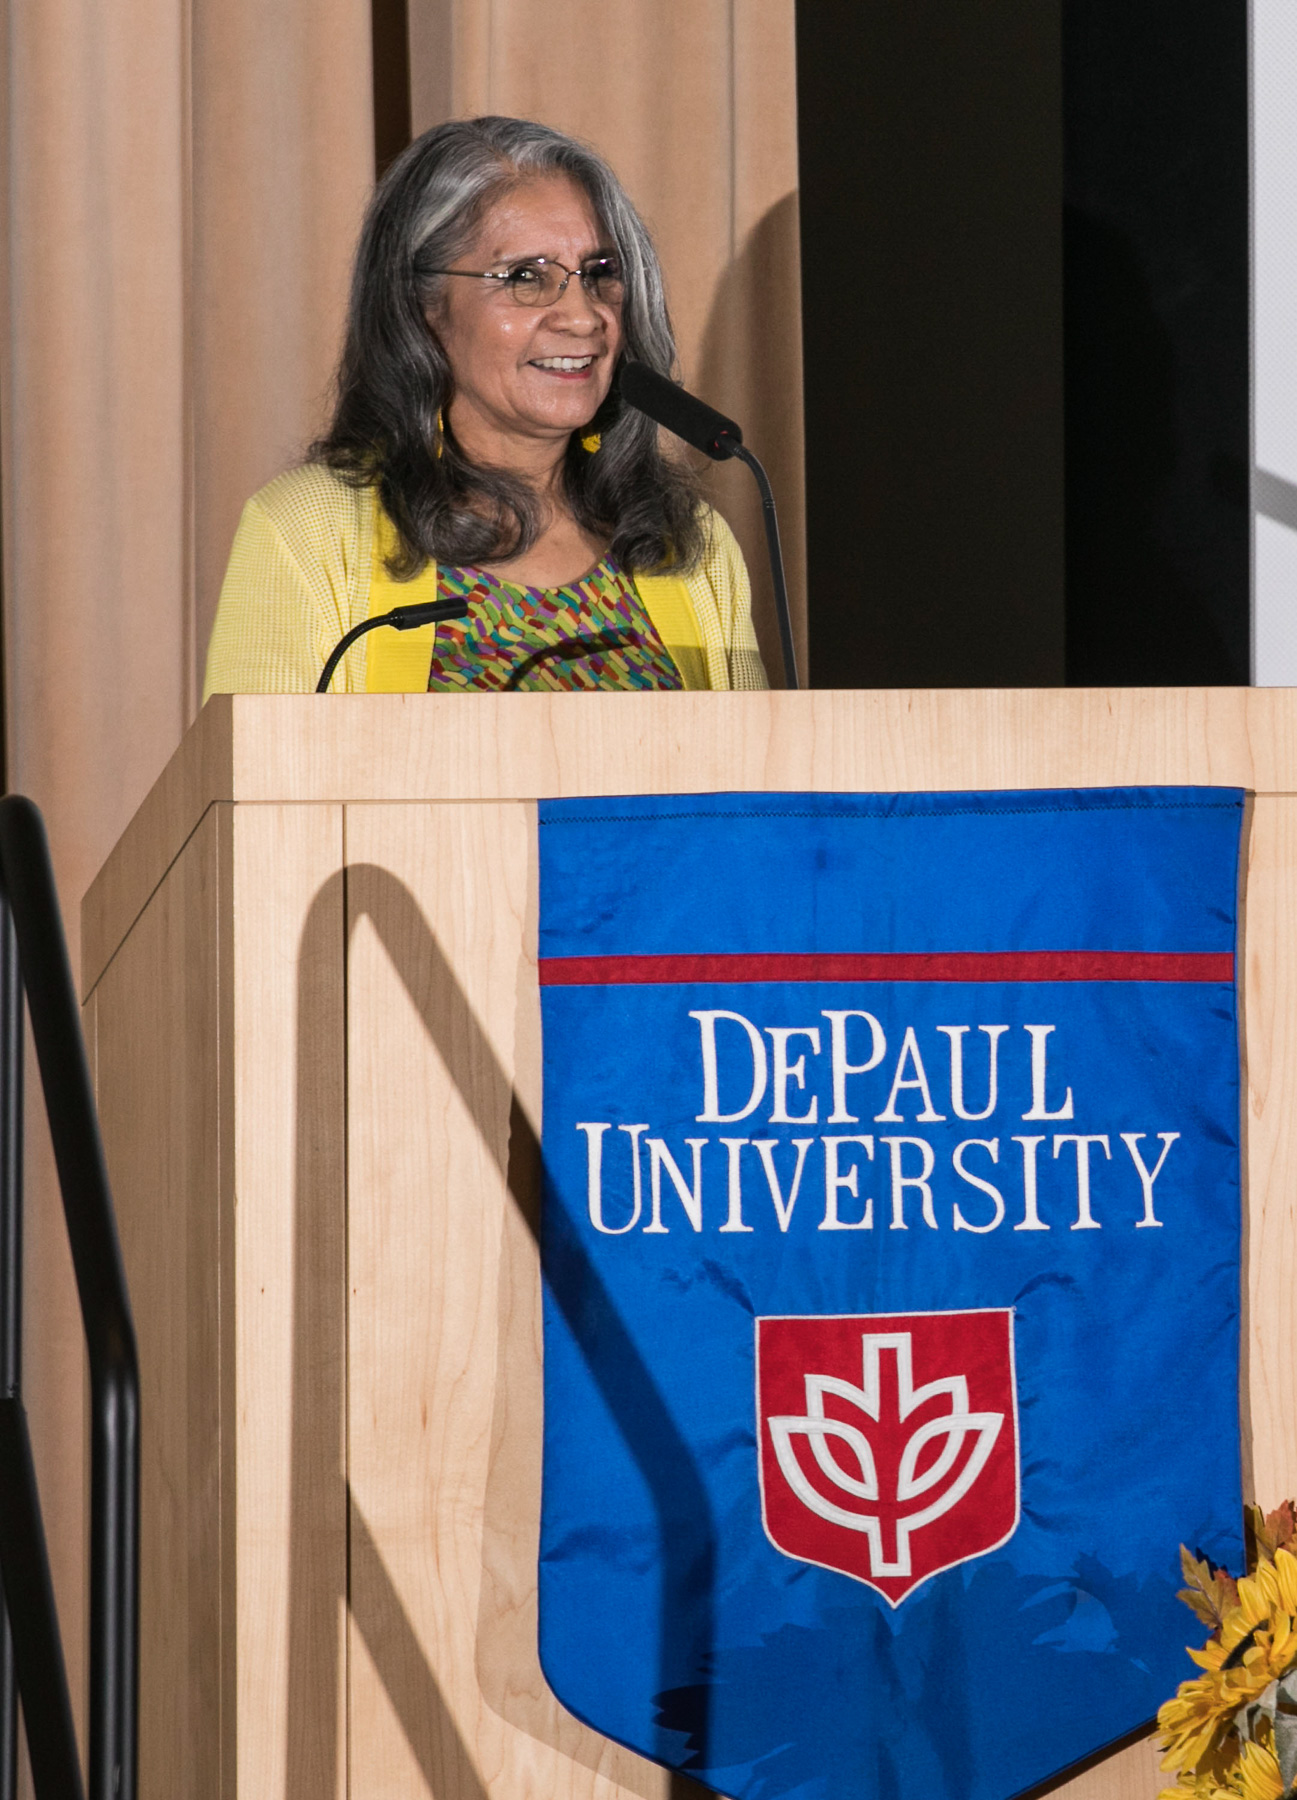 Virginia Martinez, one of the first Latina graduates of DePaul's School of Law, talks about her career as an advocate for Latinos, women, children and the poor during her speech at the 2017 Dolores Huerta Prayer Breakfast. (DePaul University/Jamie Moncrief)